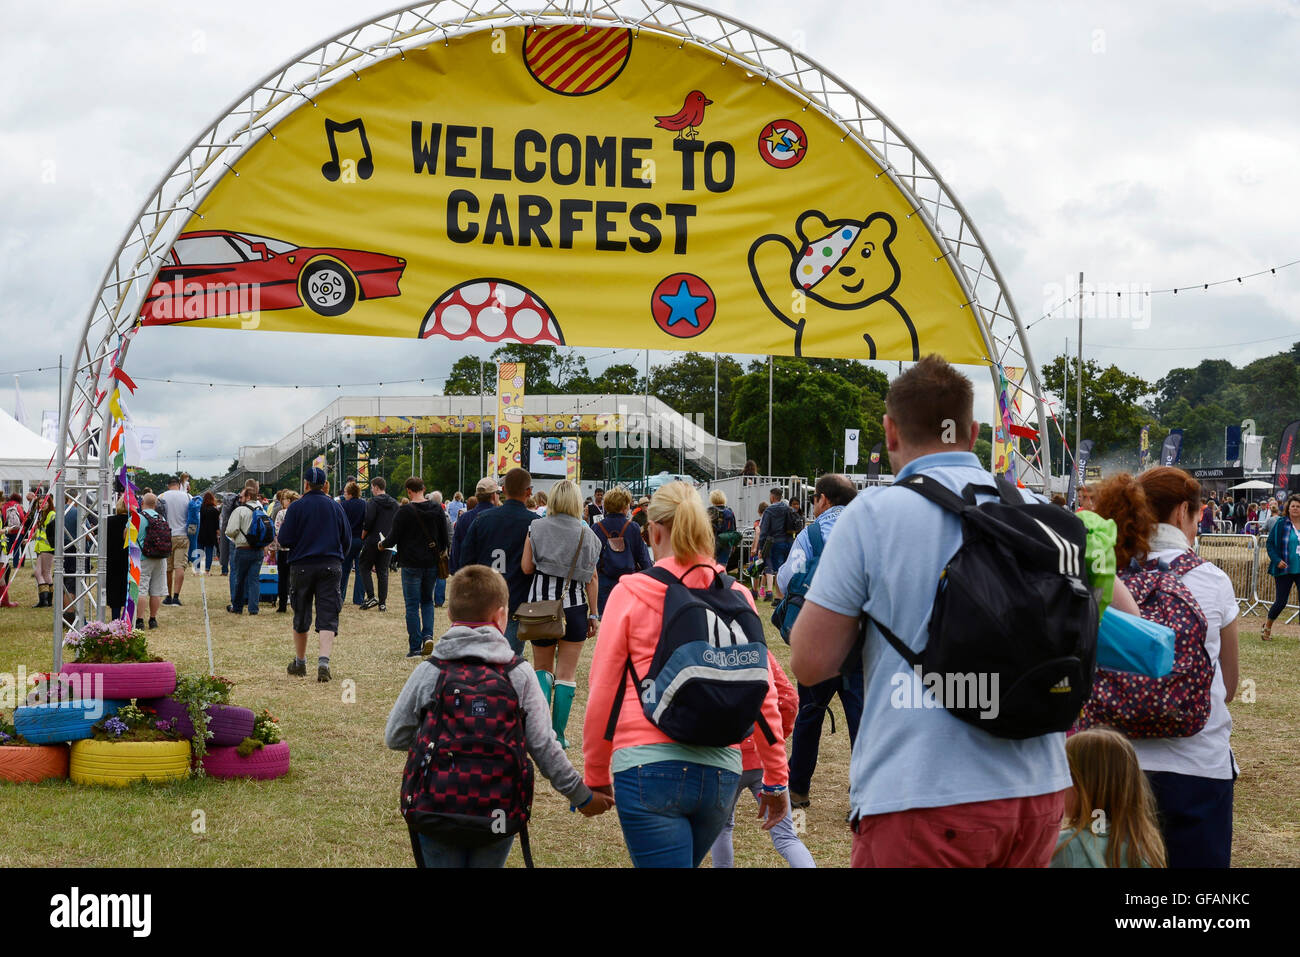 Carfest North, Bolesworth, Cheshire, UK. 30th July, 2016. People entering the main entrance. The event is the brainchild of Chris Evans and features 3 days of cars, music and entertainment with profits being donated to the charity Children in Need. Credit:  Andrew Paterson/Alamy Live News Stock Photo